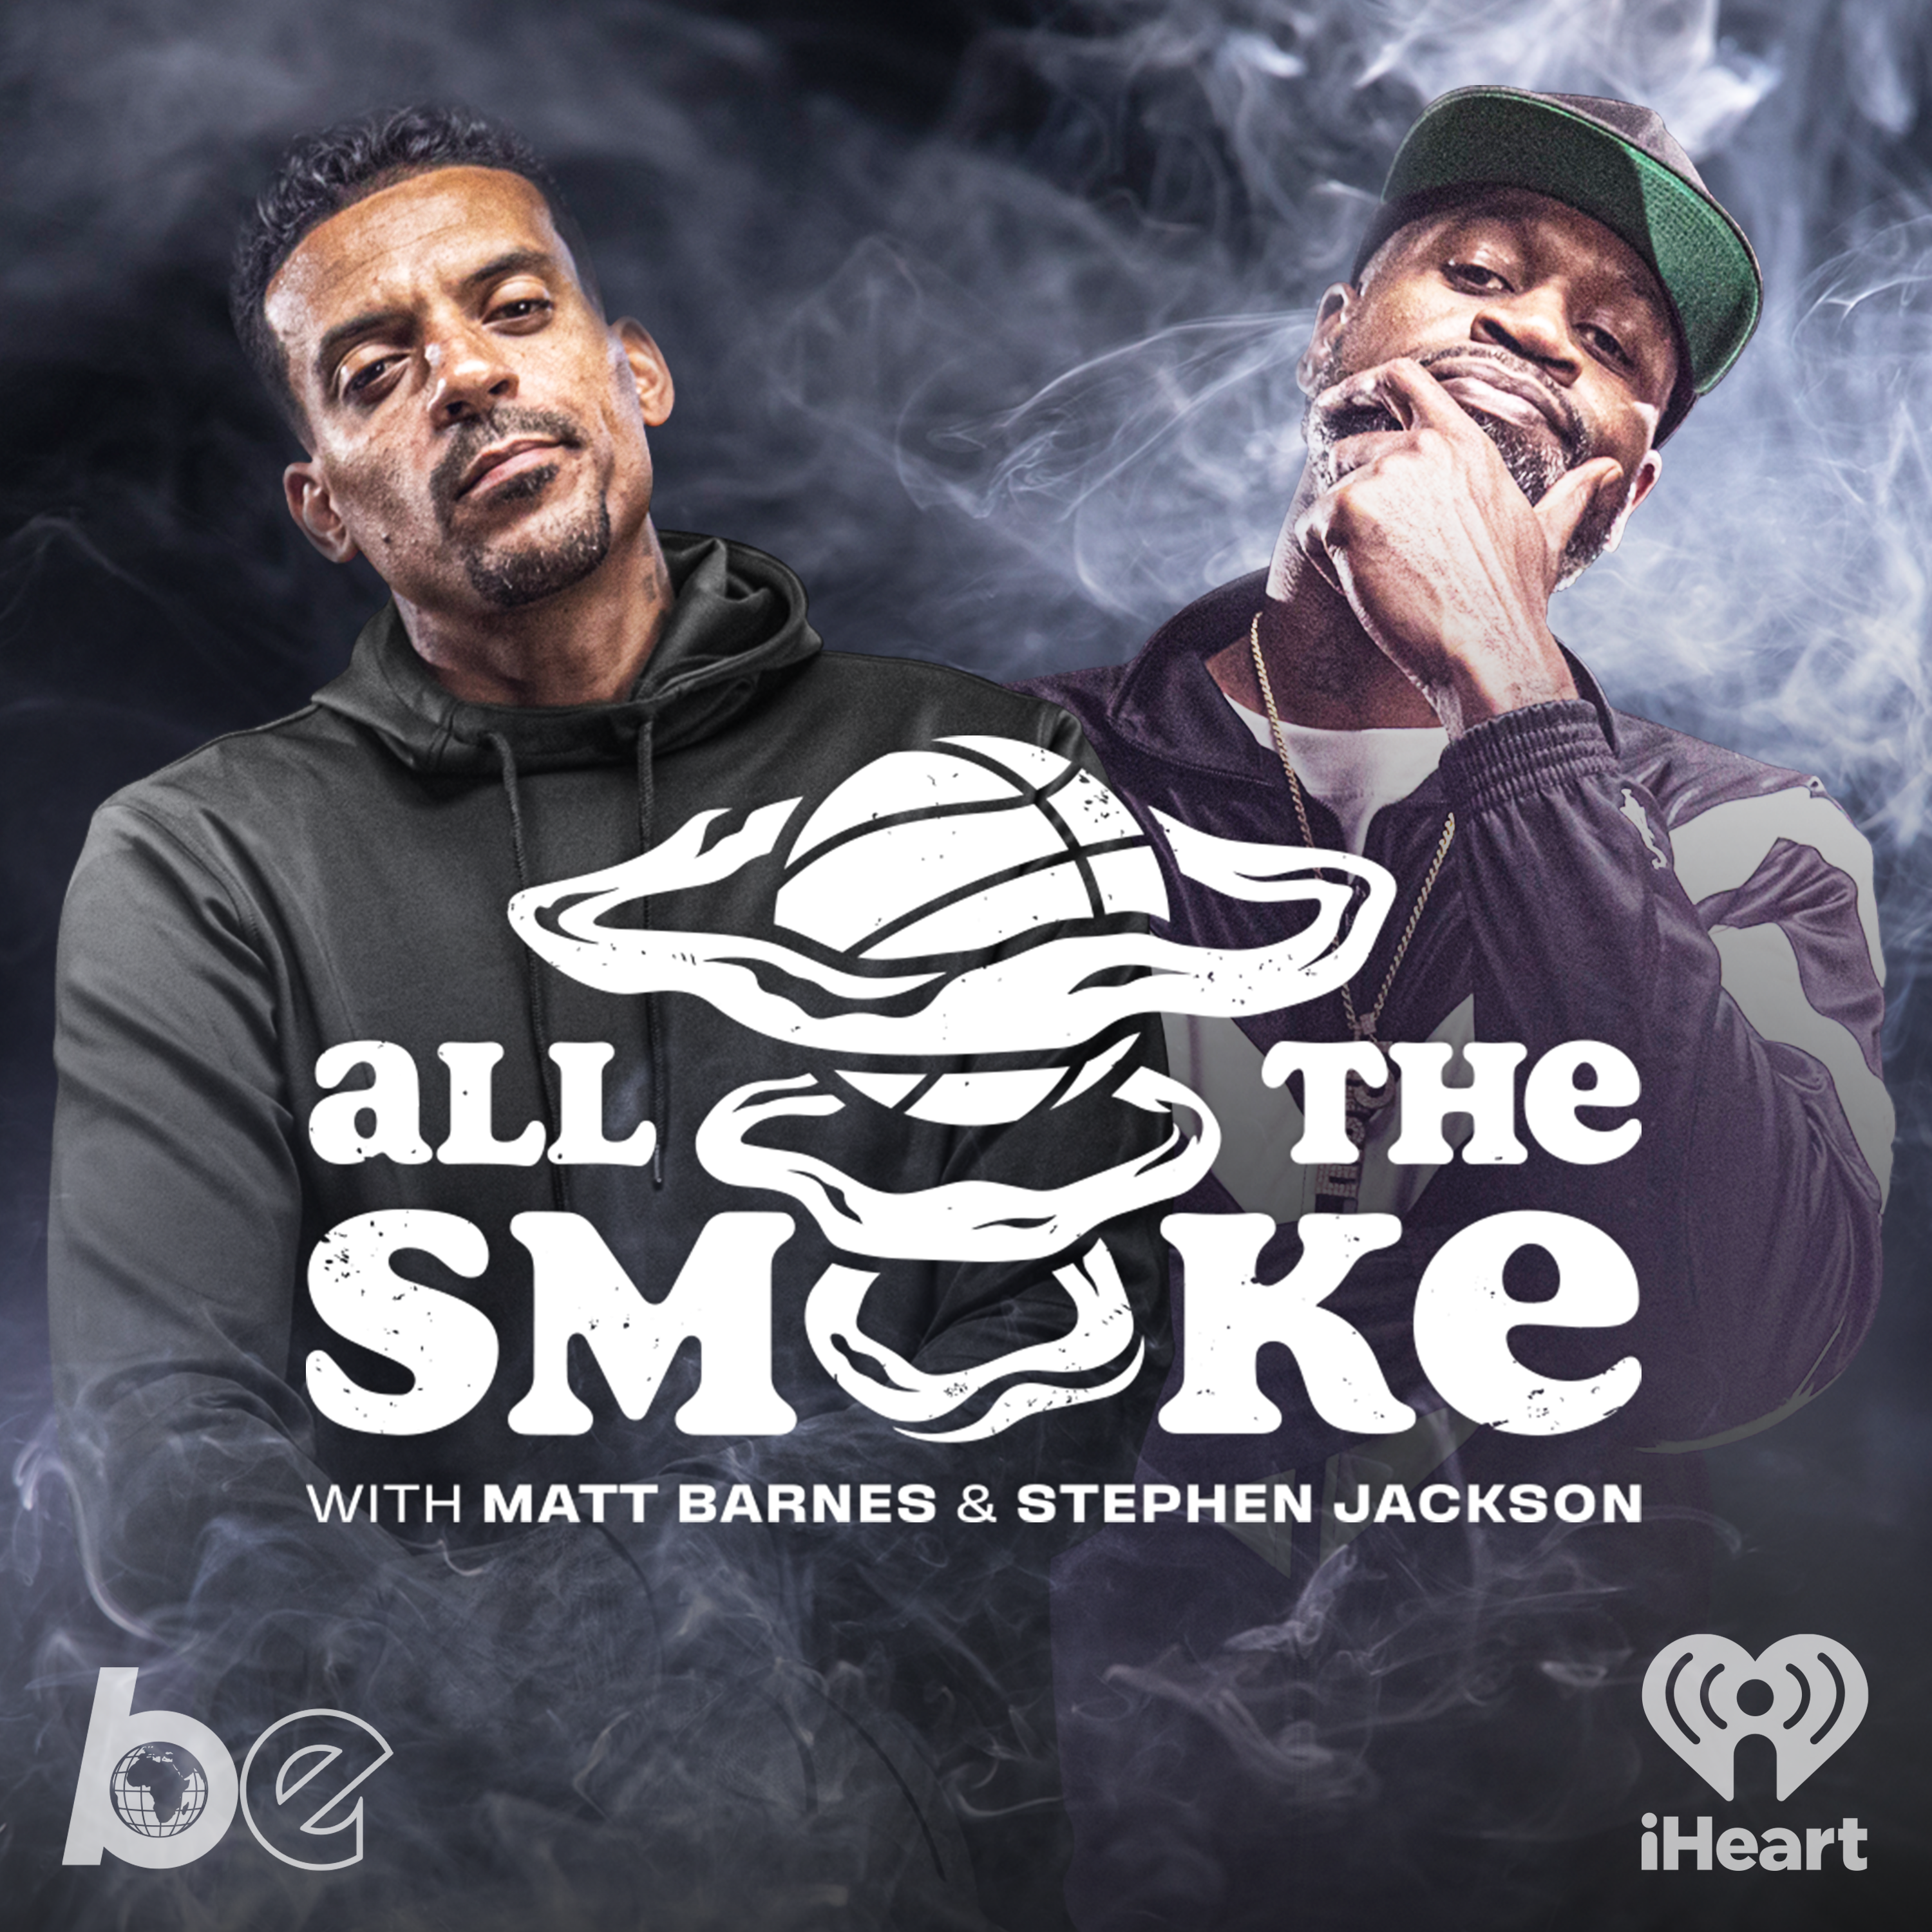 Mike Brown | Ep 203 | ALL THE SMOKE Full Episode | SHOWTIME BASKETBALL